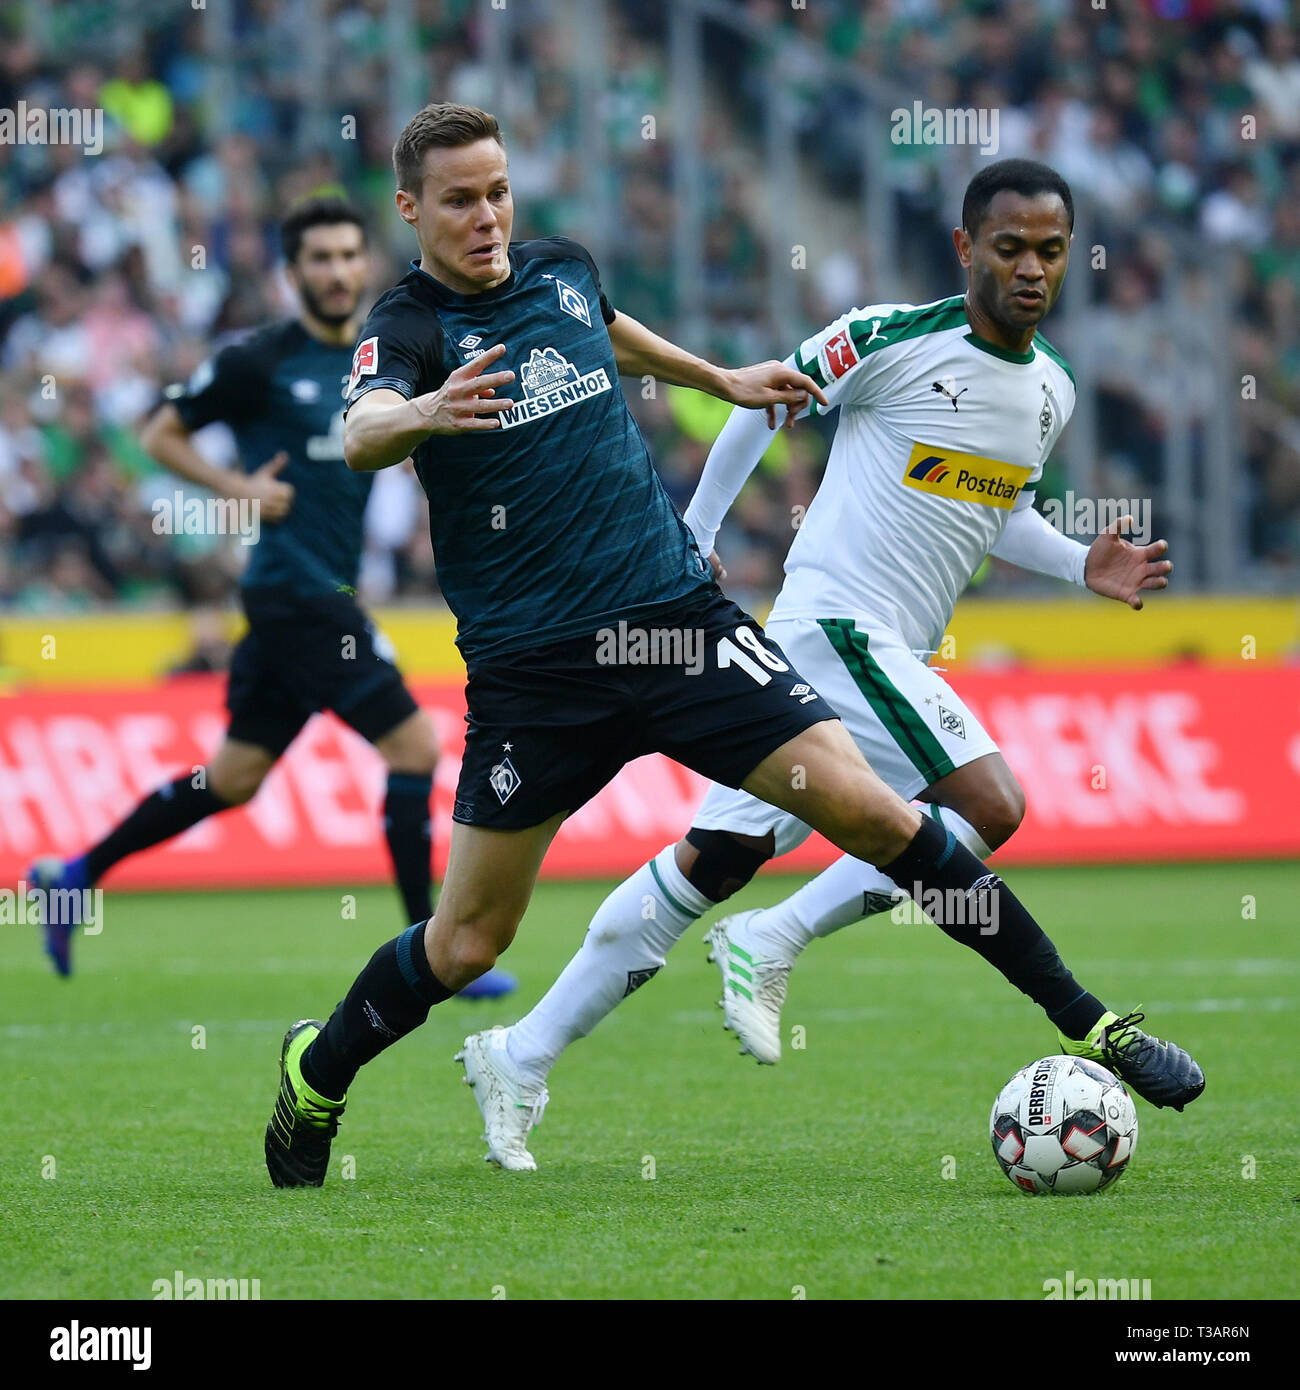 Moenchengladbach, Germany. 7th Apr, 2019. Niklas Moisander (front) of Bremen competes during the Bundesliga match between Borussia Moenchengladbach and SV Werder Bremen in Moenchengladbach, Germany, April 7, 2019. The match ended in a 1-1 draw. Credit: Ulrich Hufnagel/Xinhua/Alamy Live News Stock Photo